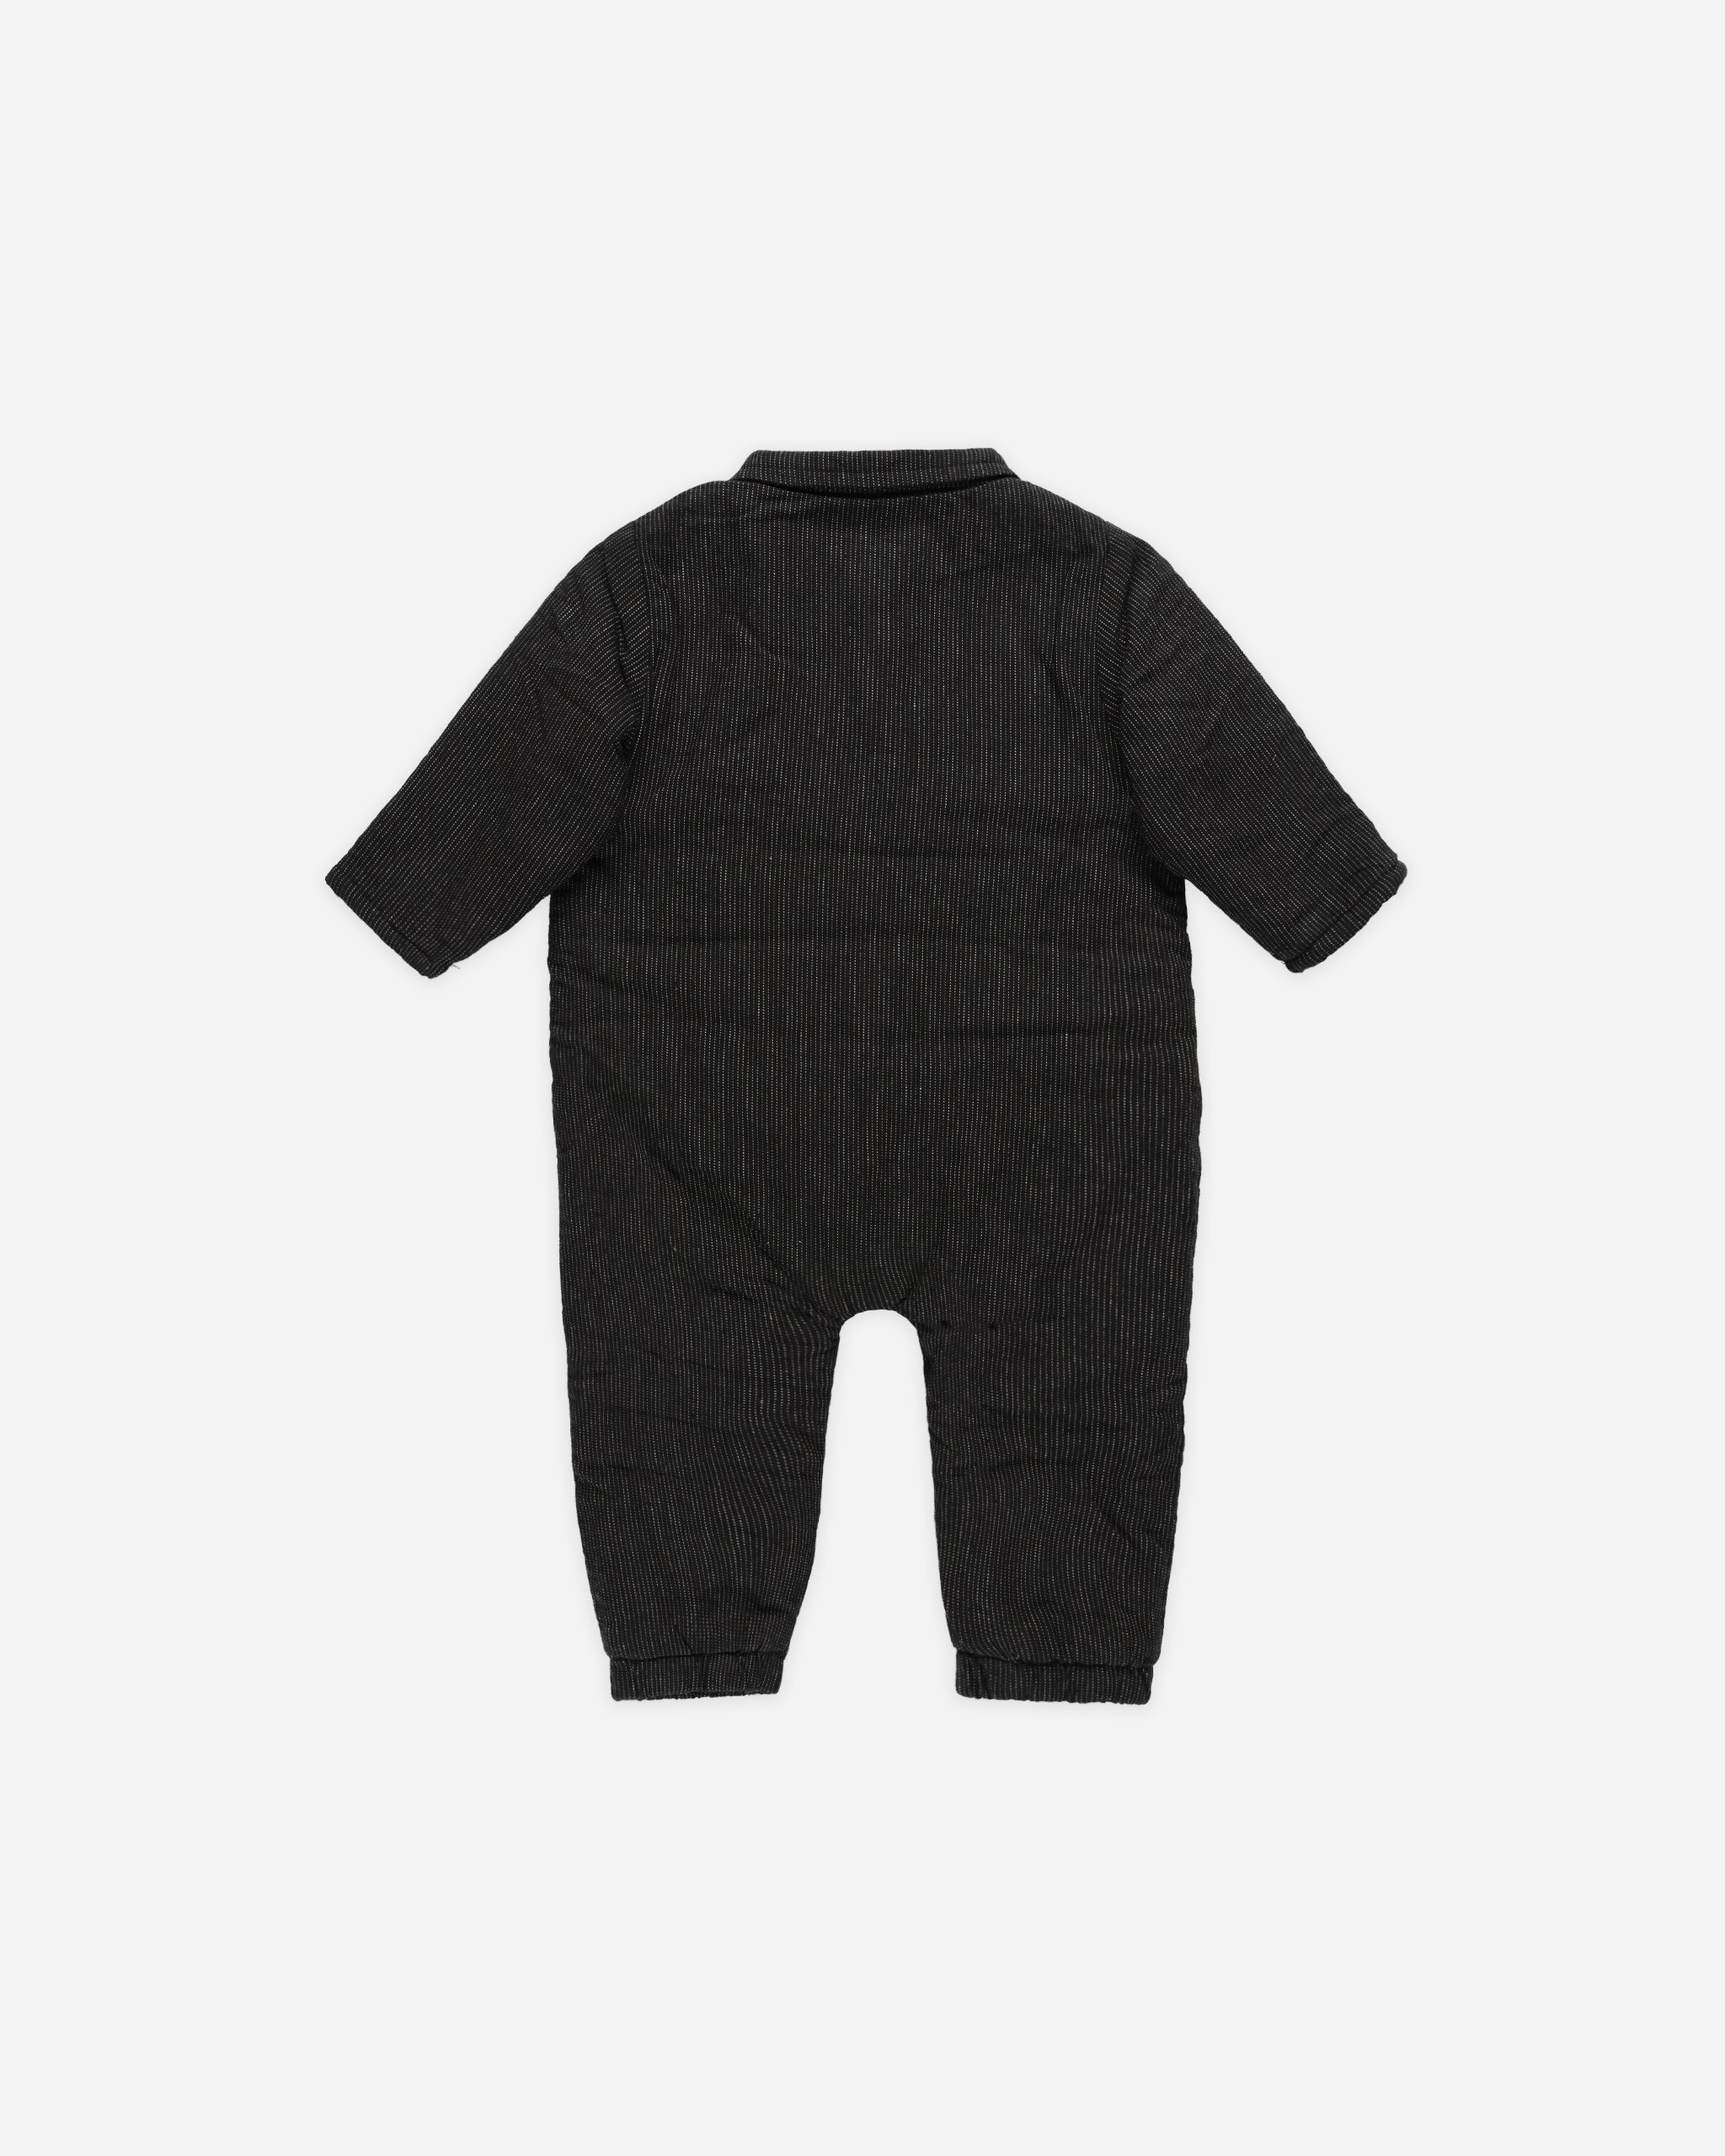 Baby Jumpsuit || Black Stripe - Rylee + Cru | Kids Clothes | Trendy Baby Clothes | Modern Infant Outfits |